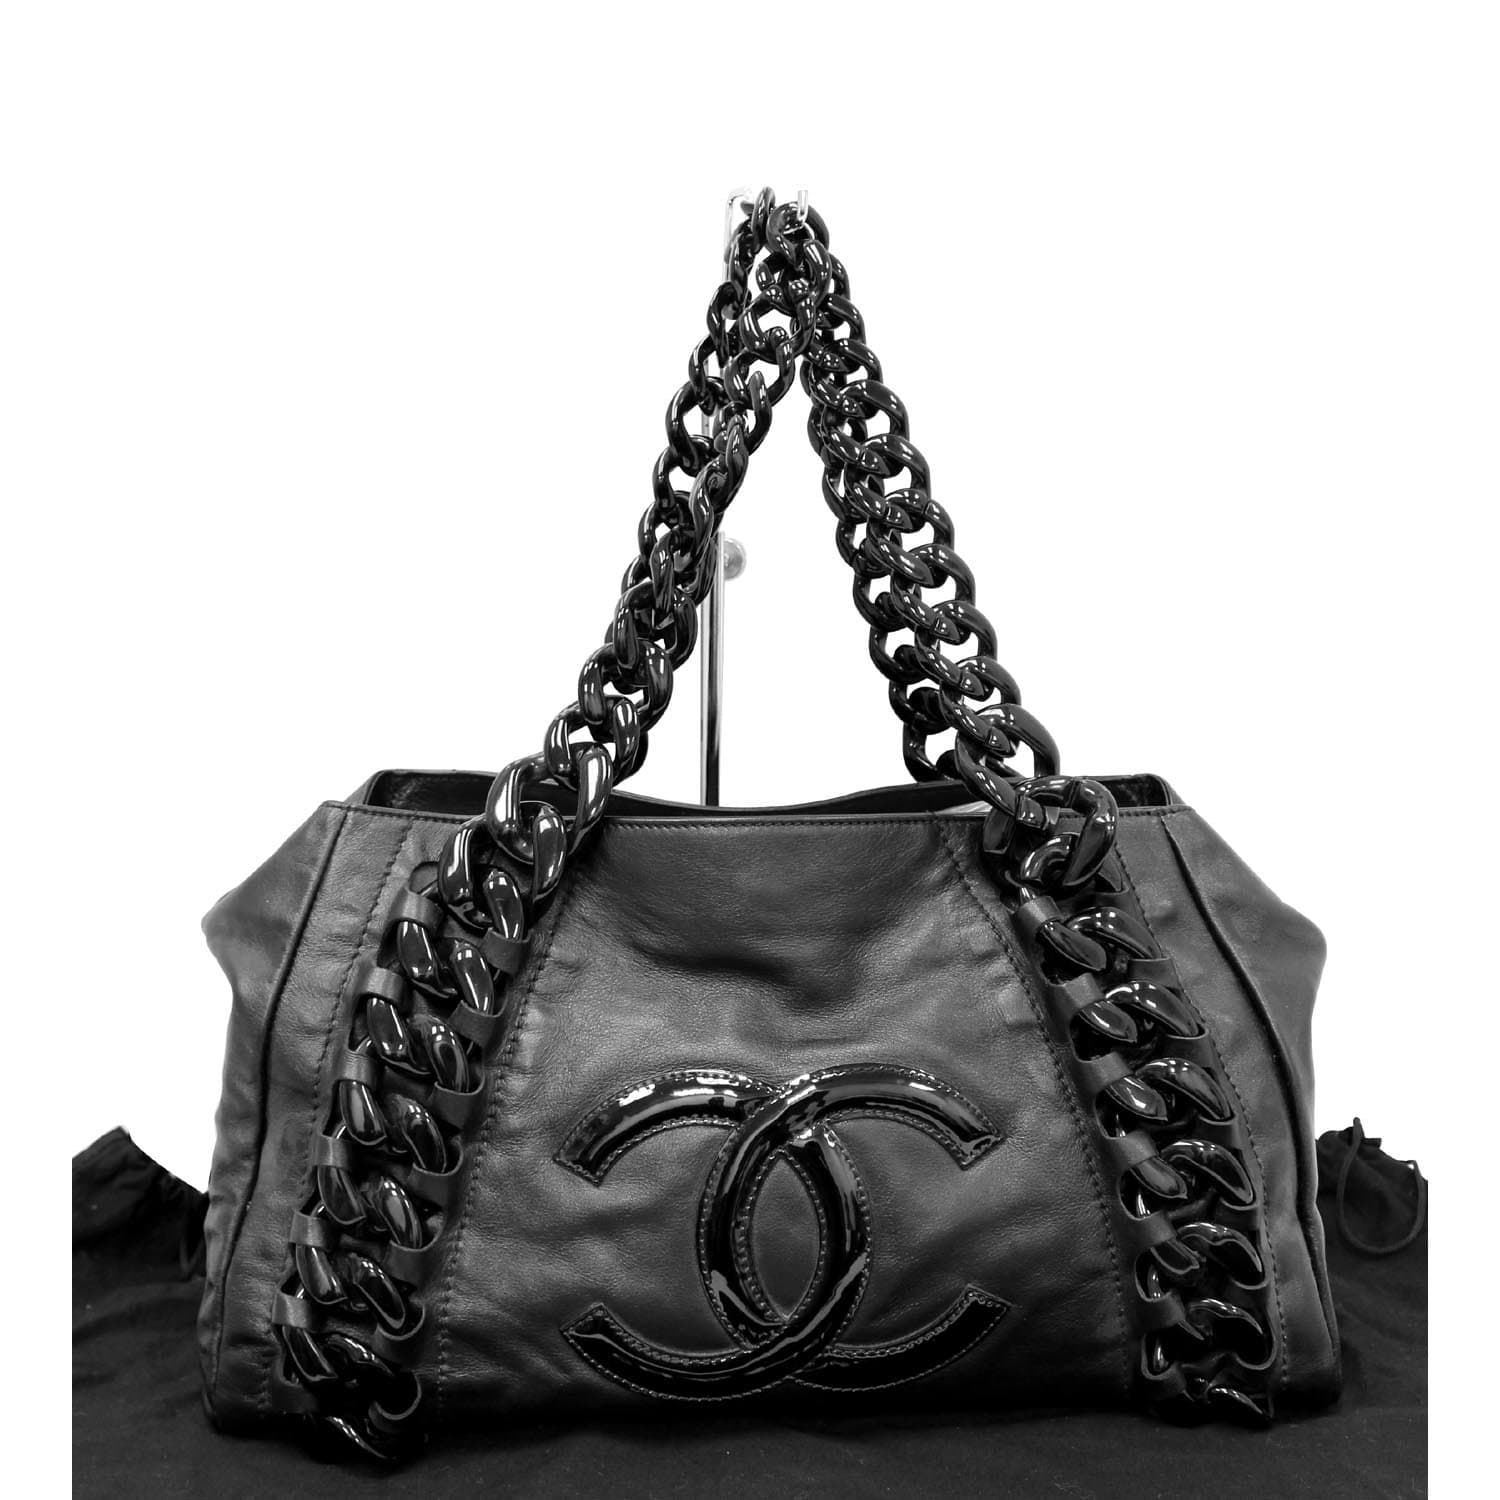 Authentic Chanel Black Solid Metal Jewelry on sale at JHROP. Luxury  Designer Consignment Resale @jhrop_official